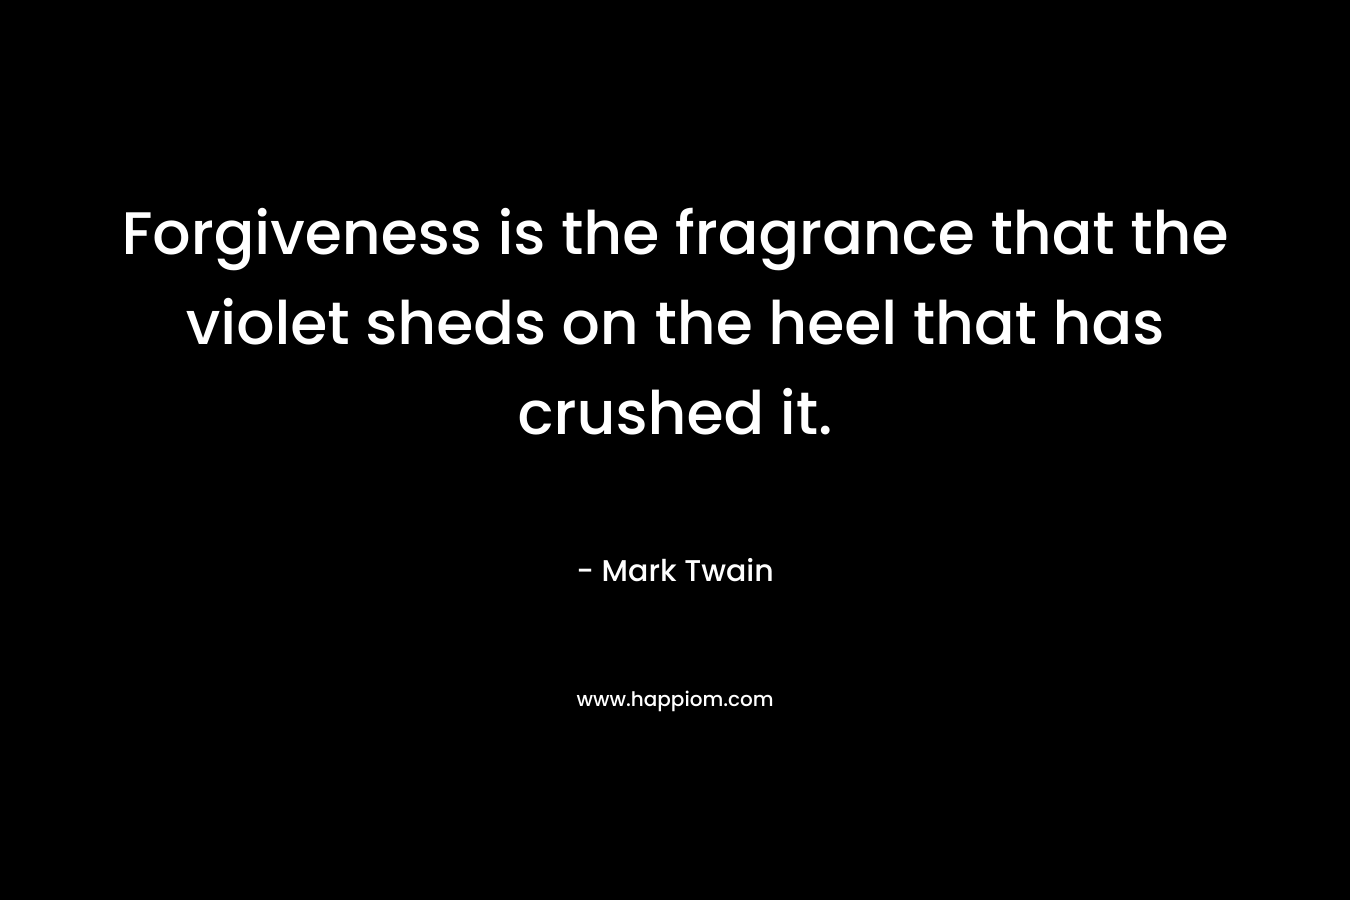 Forgiveness is the fragrance that the violet sheds on the heel that has crushed it. – Mark Twain